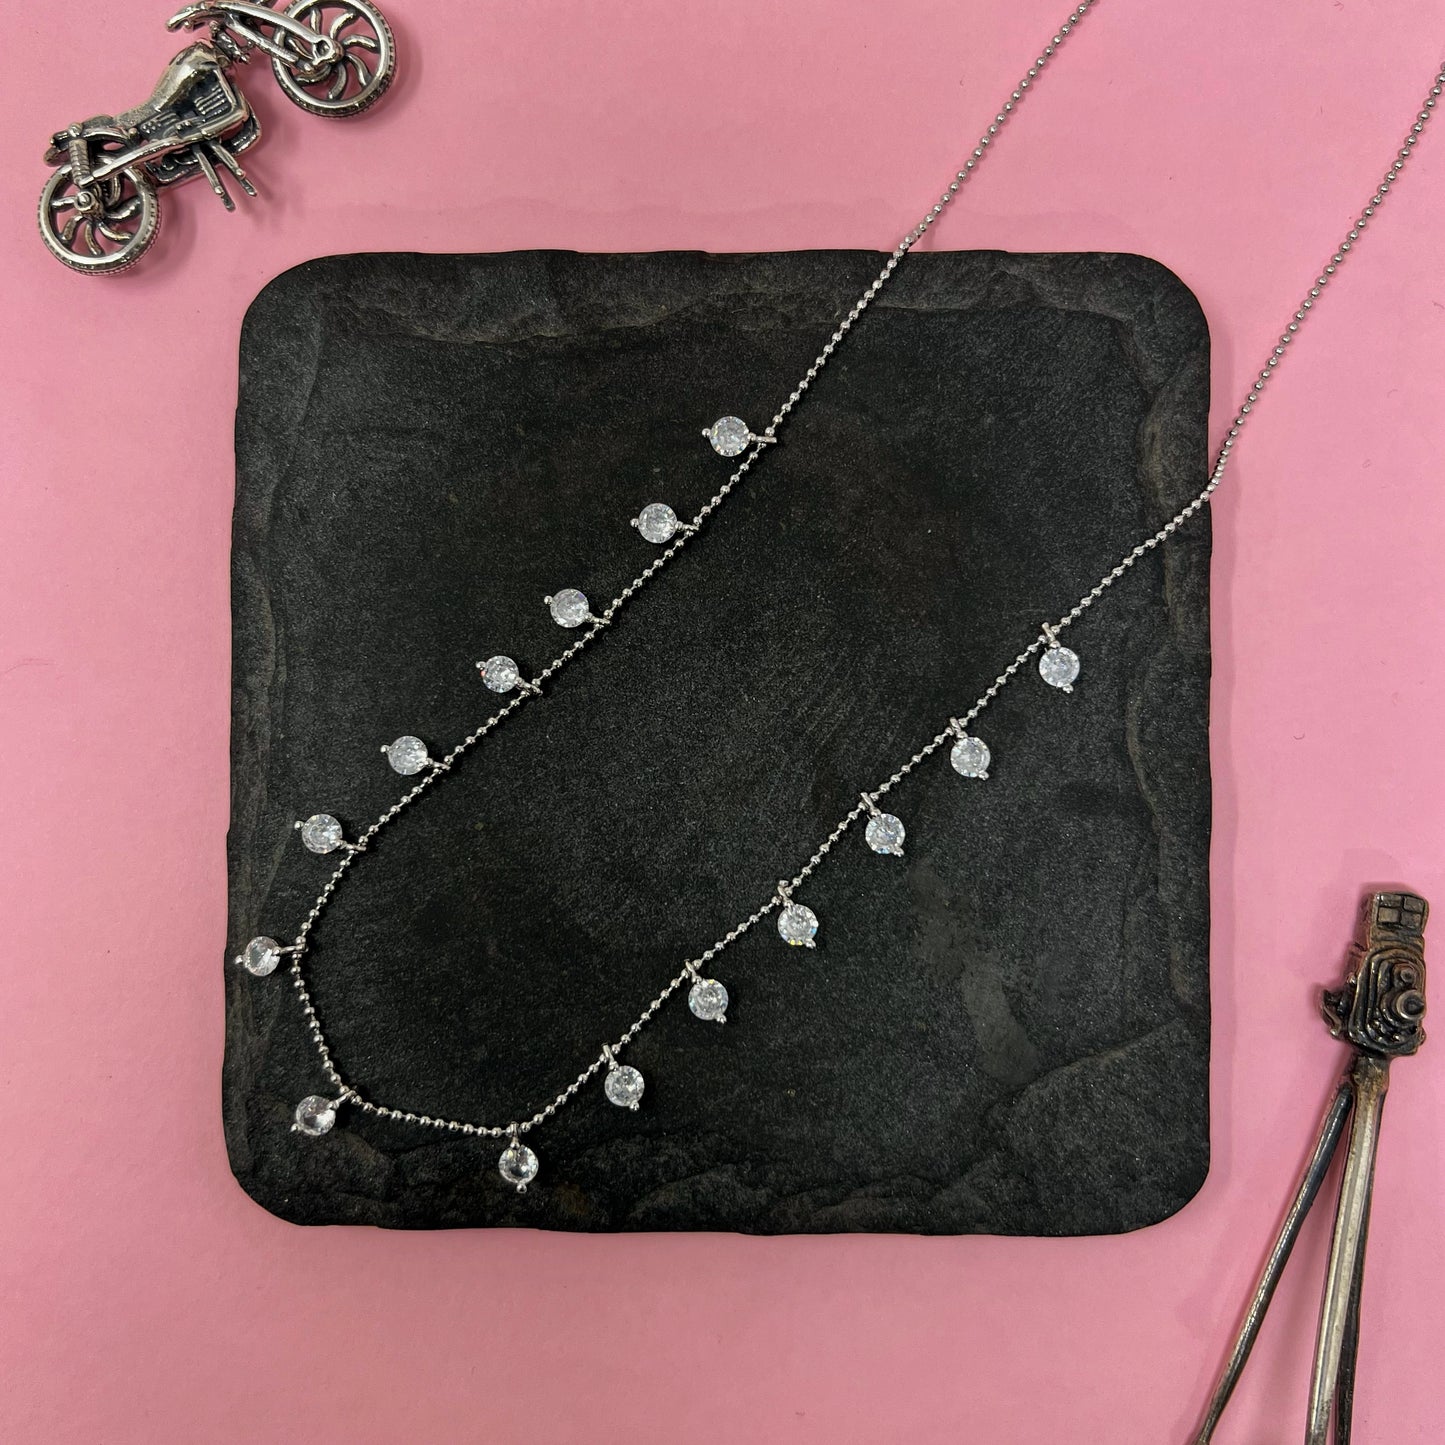 Solitare Charms With Beads Chain